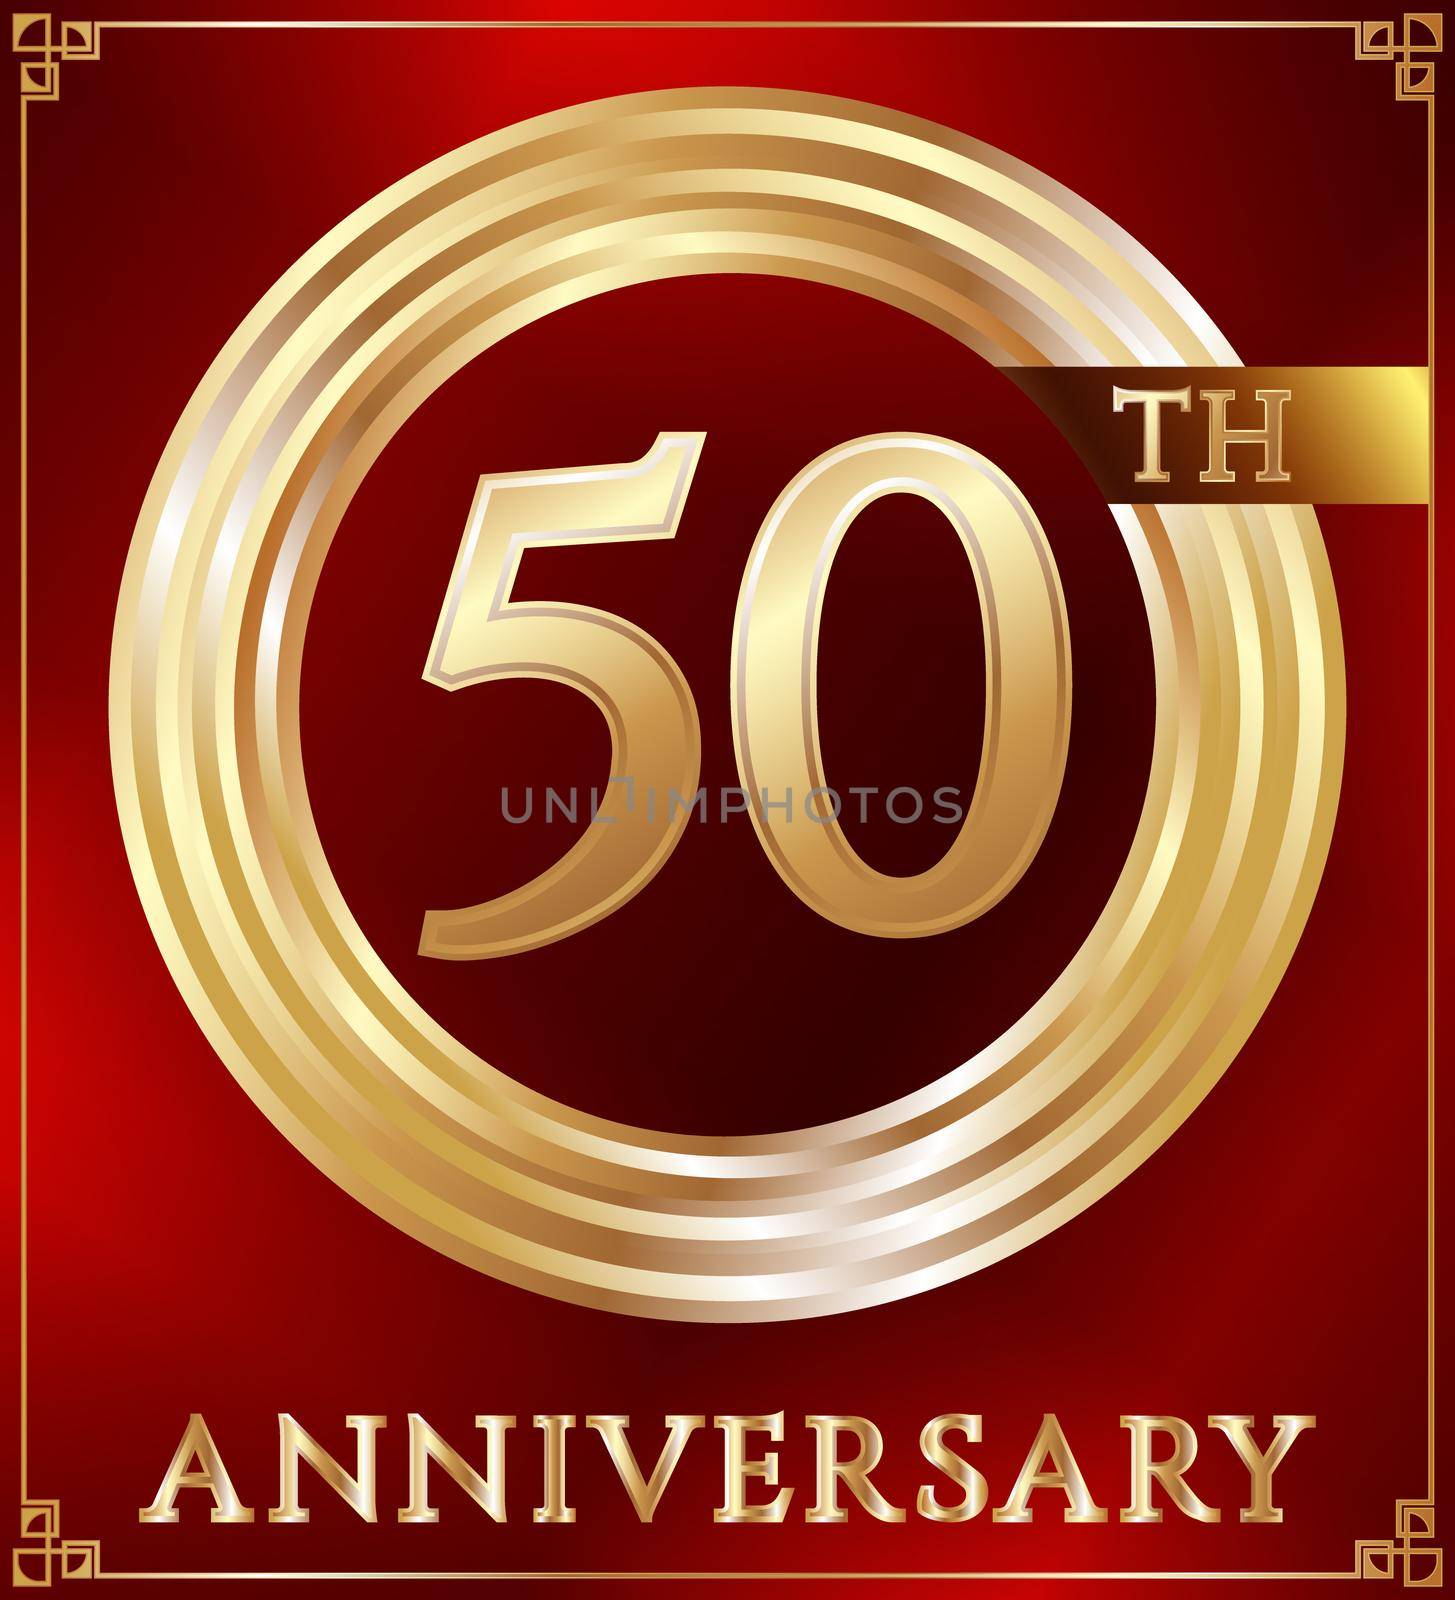 Anniversary gold ring logo number 50. Anniversary card. Red background. Vector illustration.